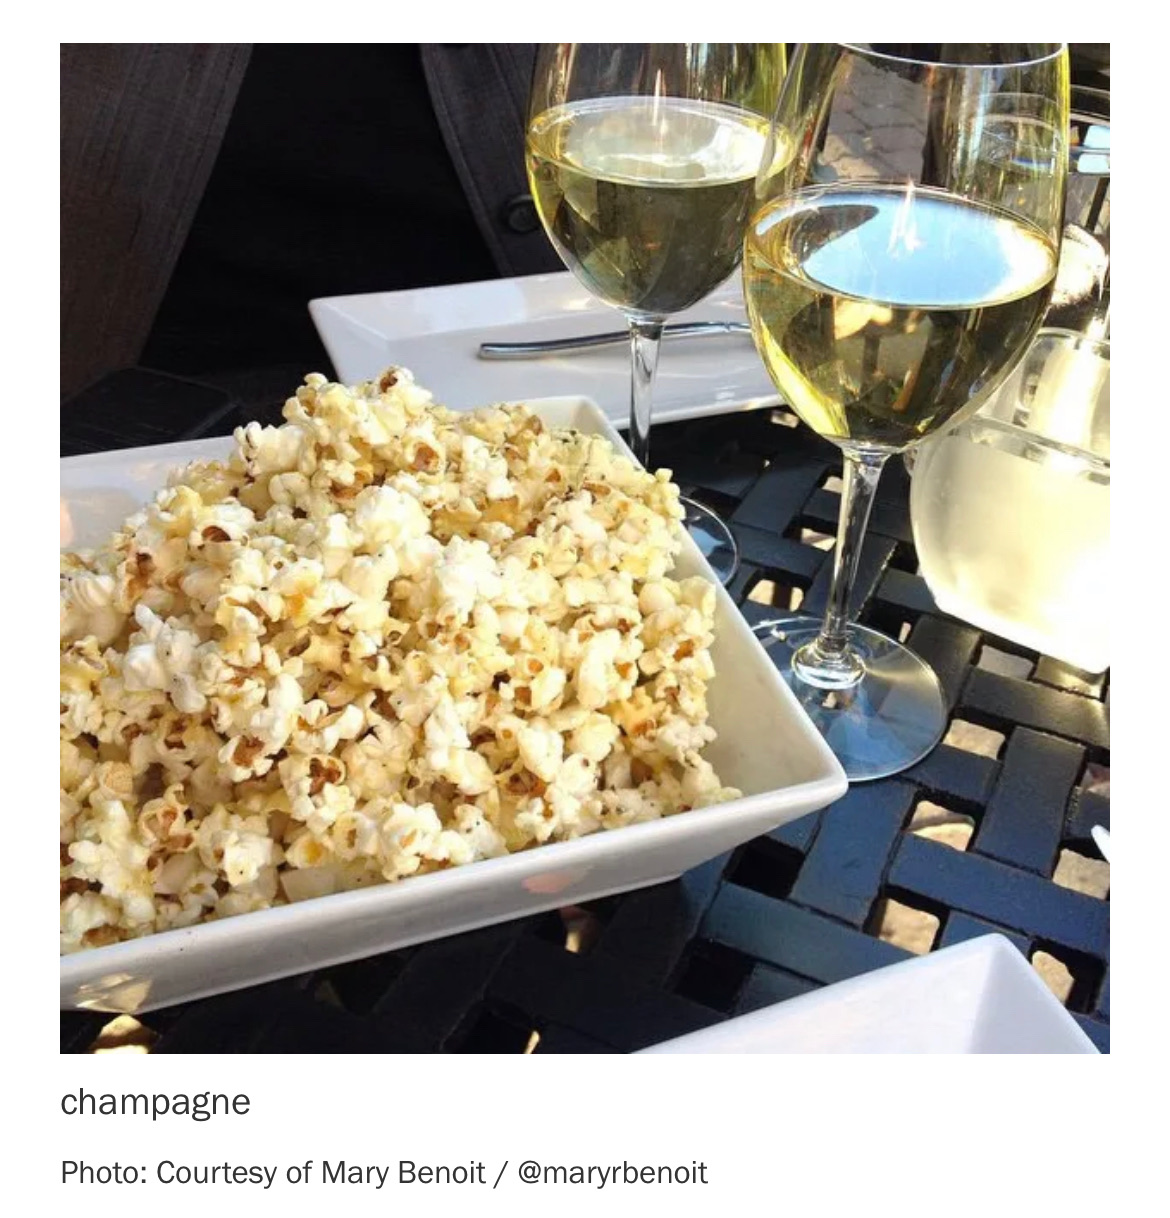 Champagne with popcorn? The perfect pairing!